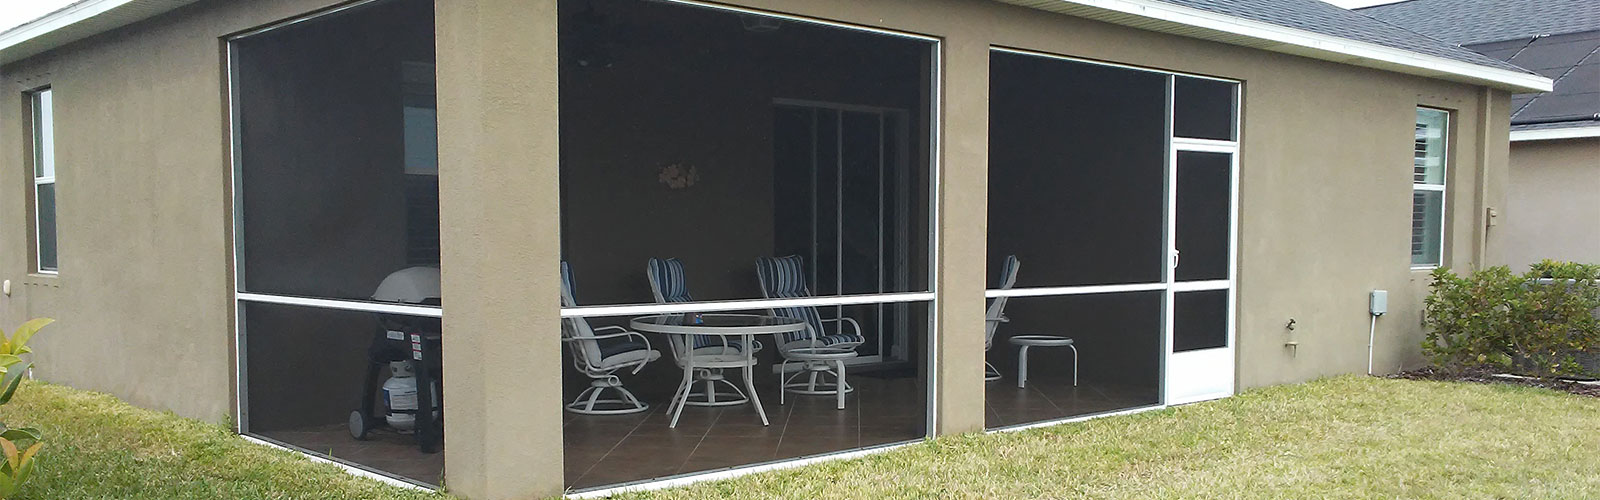 Exterior of Residential Patio with Screen Walls